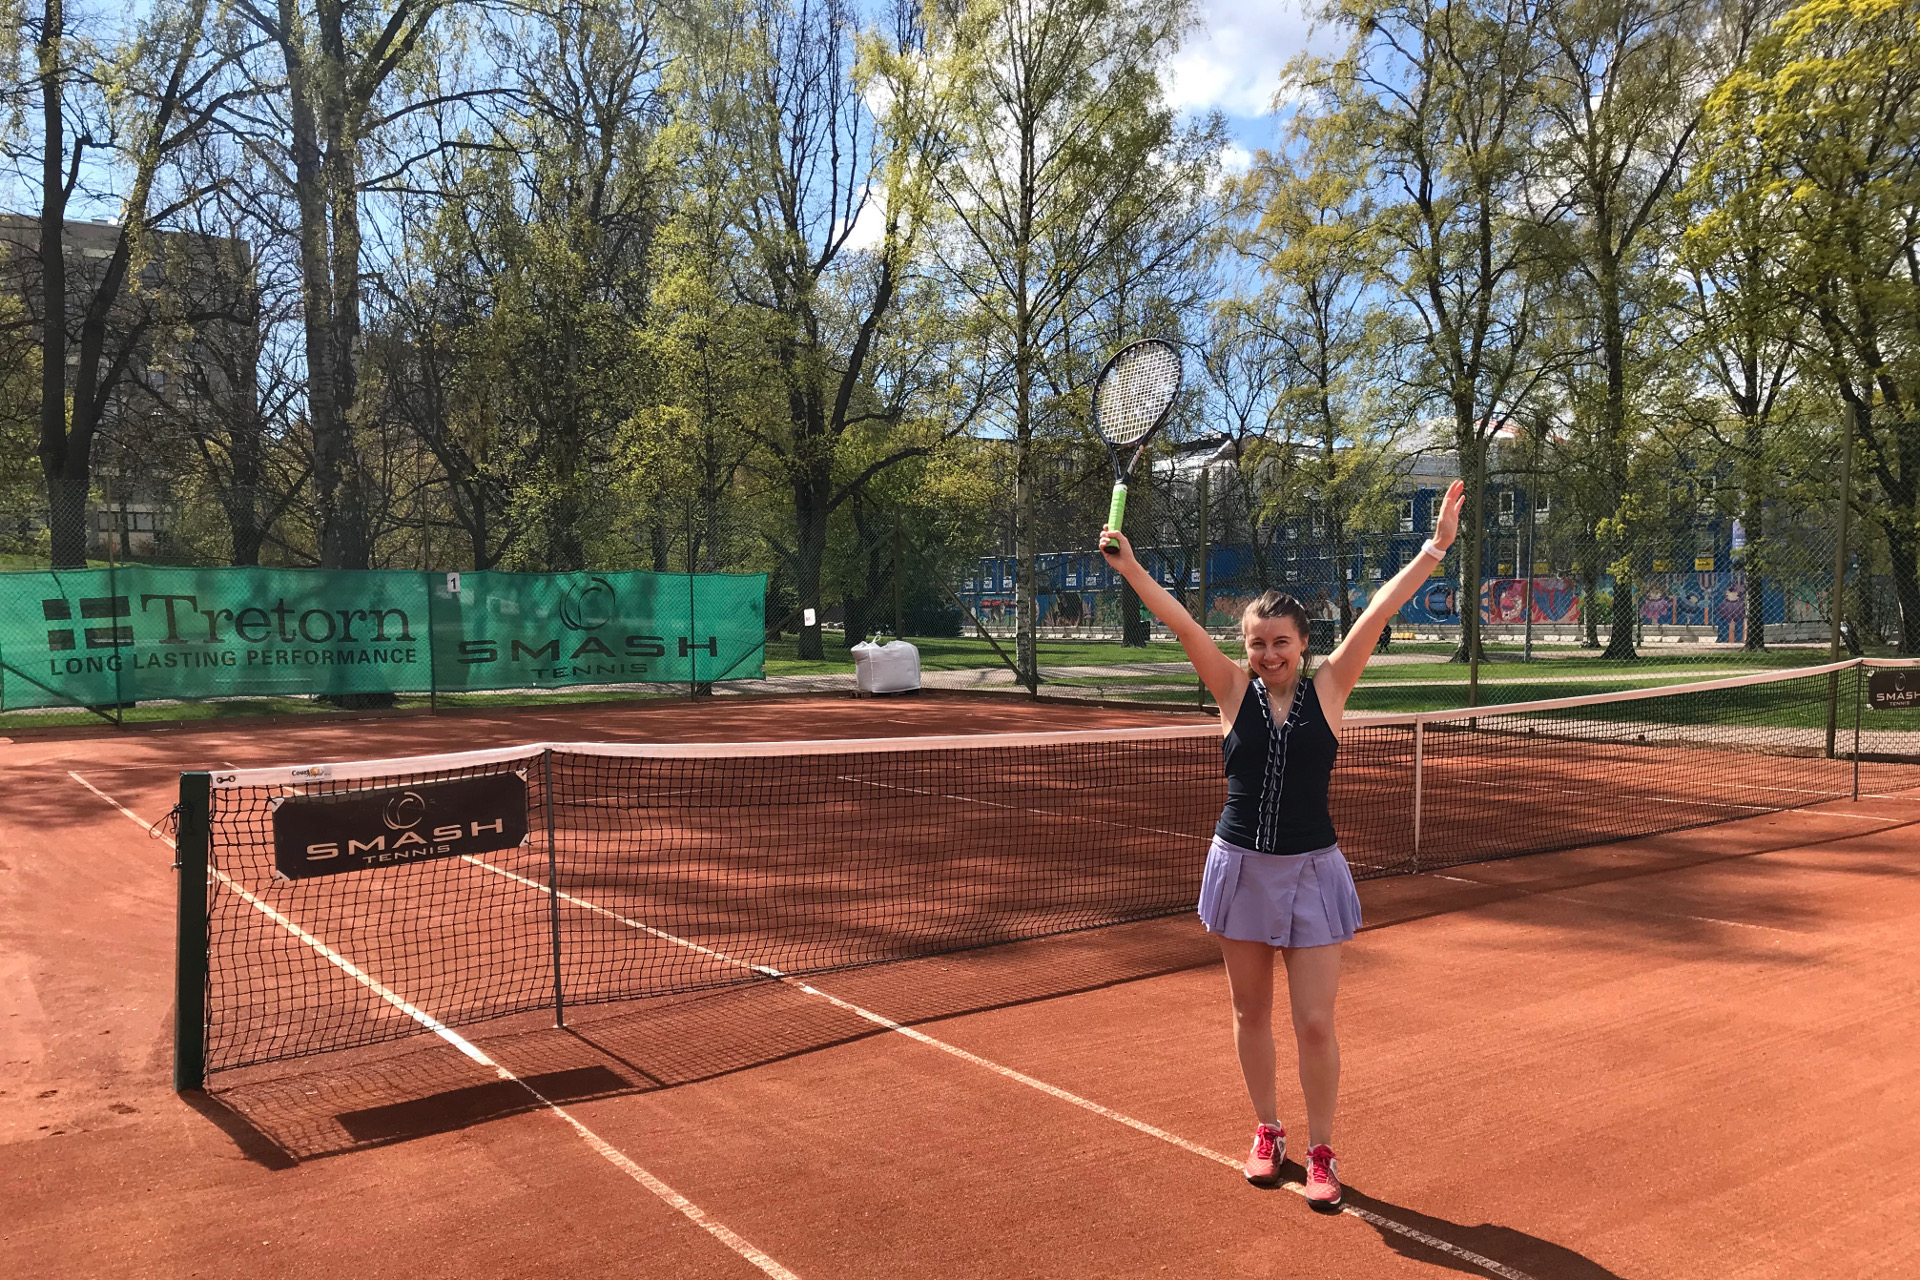 Happiness and fulfillment in the tennis court